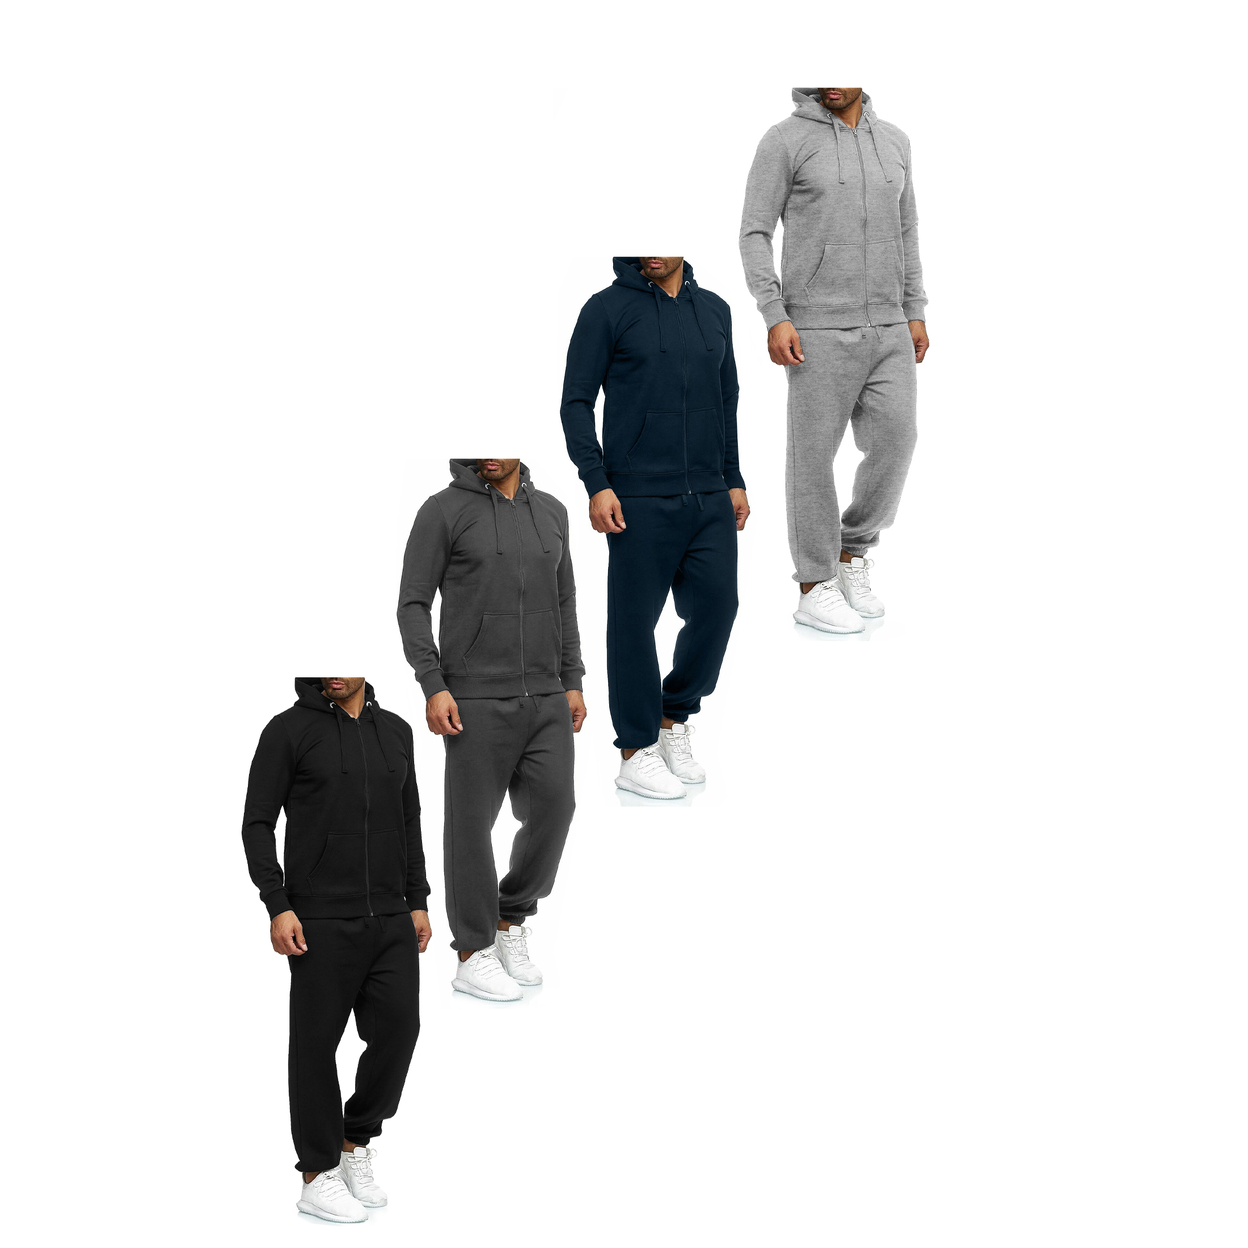 Multi-Pack: Men's Casual Big & Tall Athletic Active Winter Warm Fleece Lined Full Zip Tracksuit Jogger Set - Charcoal, 2-pack, Medium